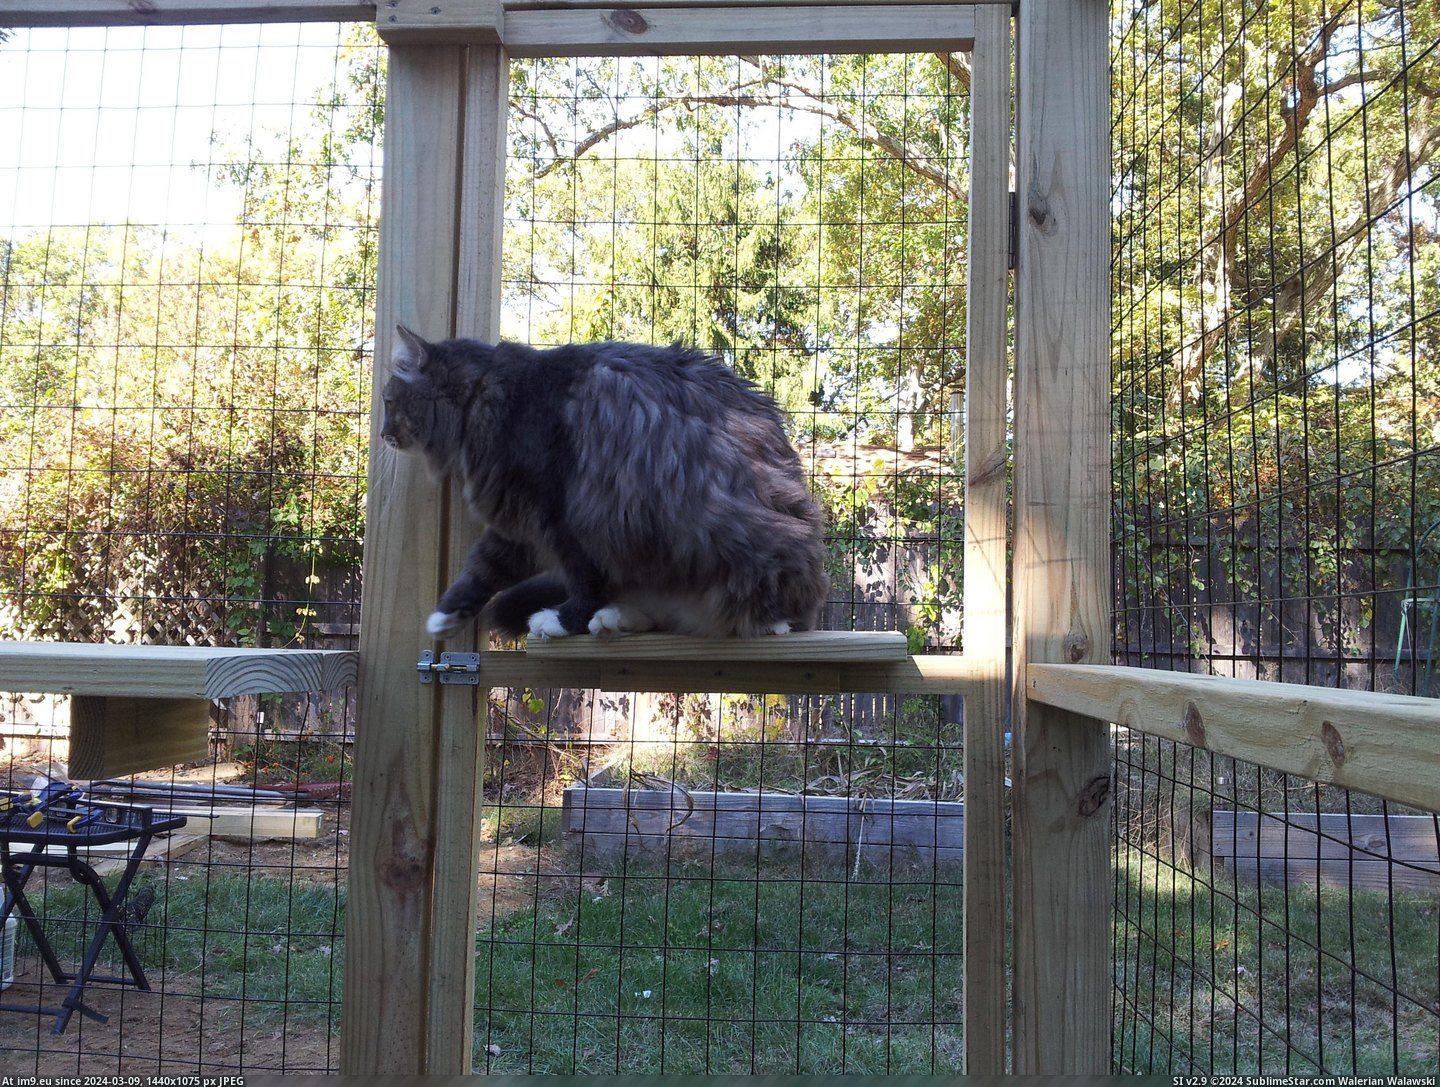 #Cats #For #Enclosure #Indoor #Our #Finished [Cats] We finished the outside enclosure for our indoor cats! (x-post -r-pics) 9 Pic. (Изображение из альбом My r/CATS favs))